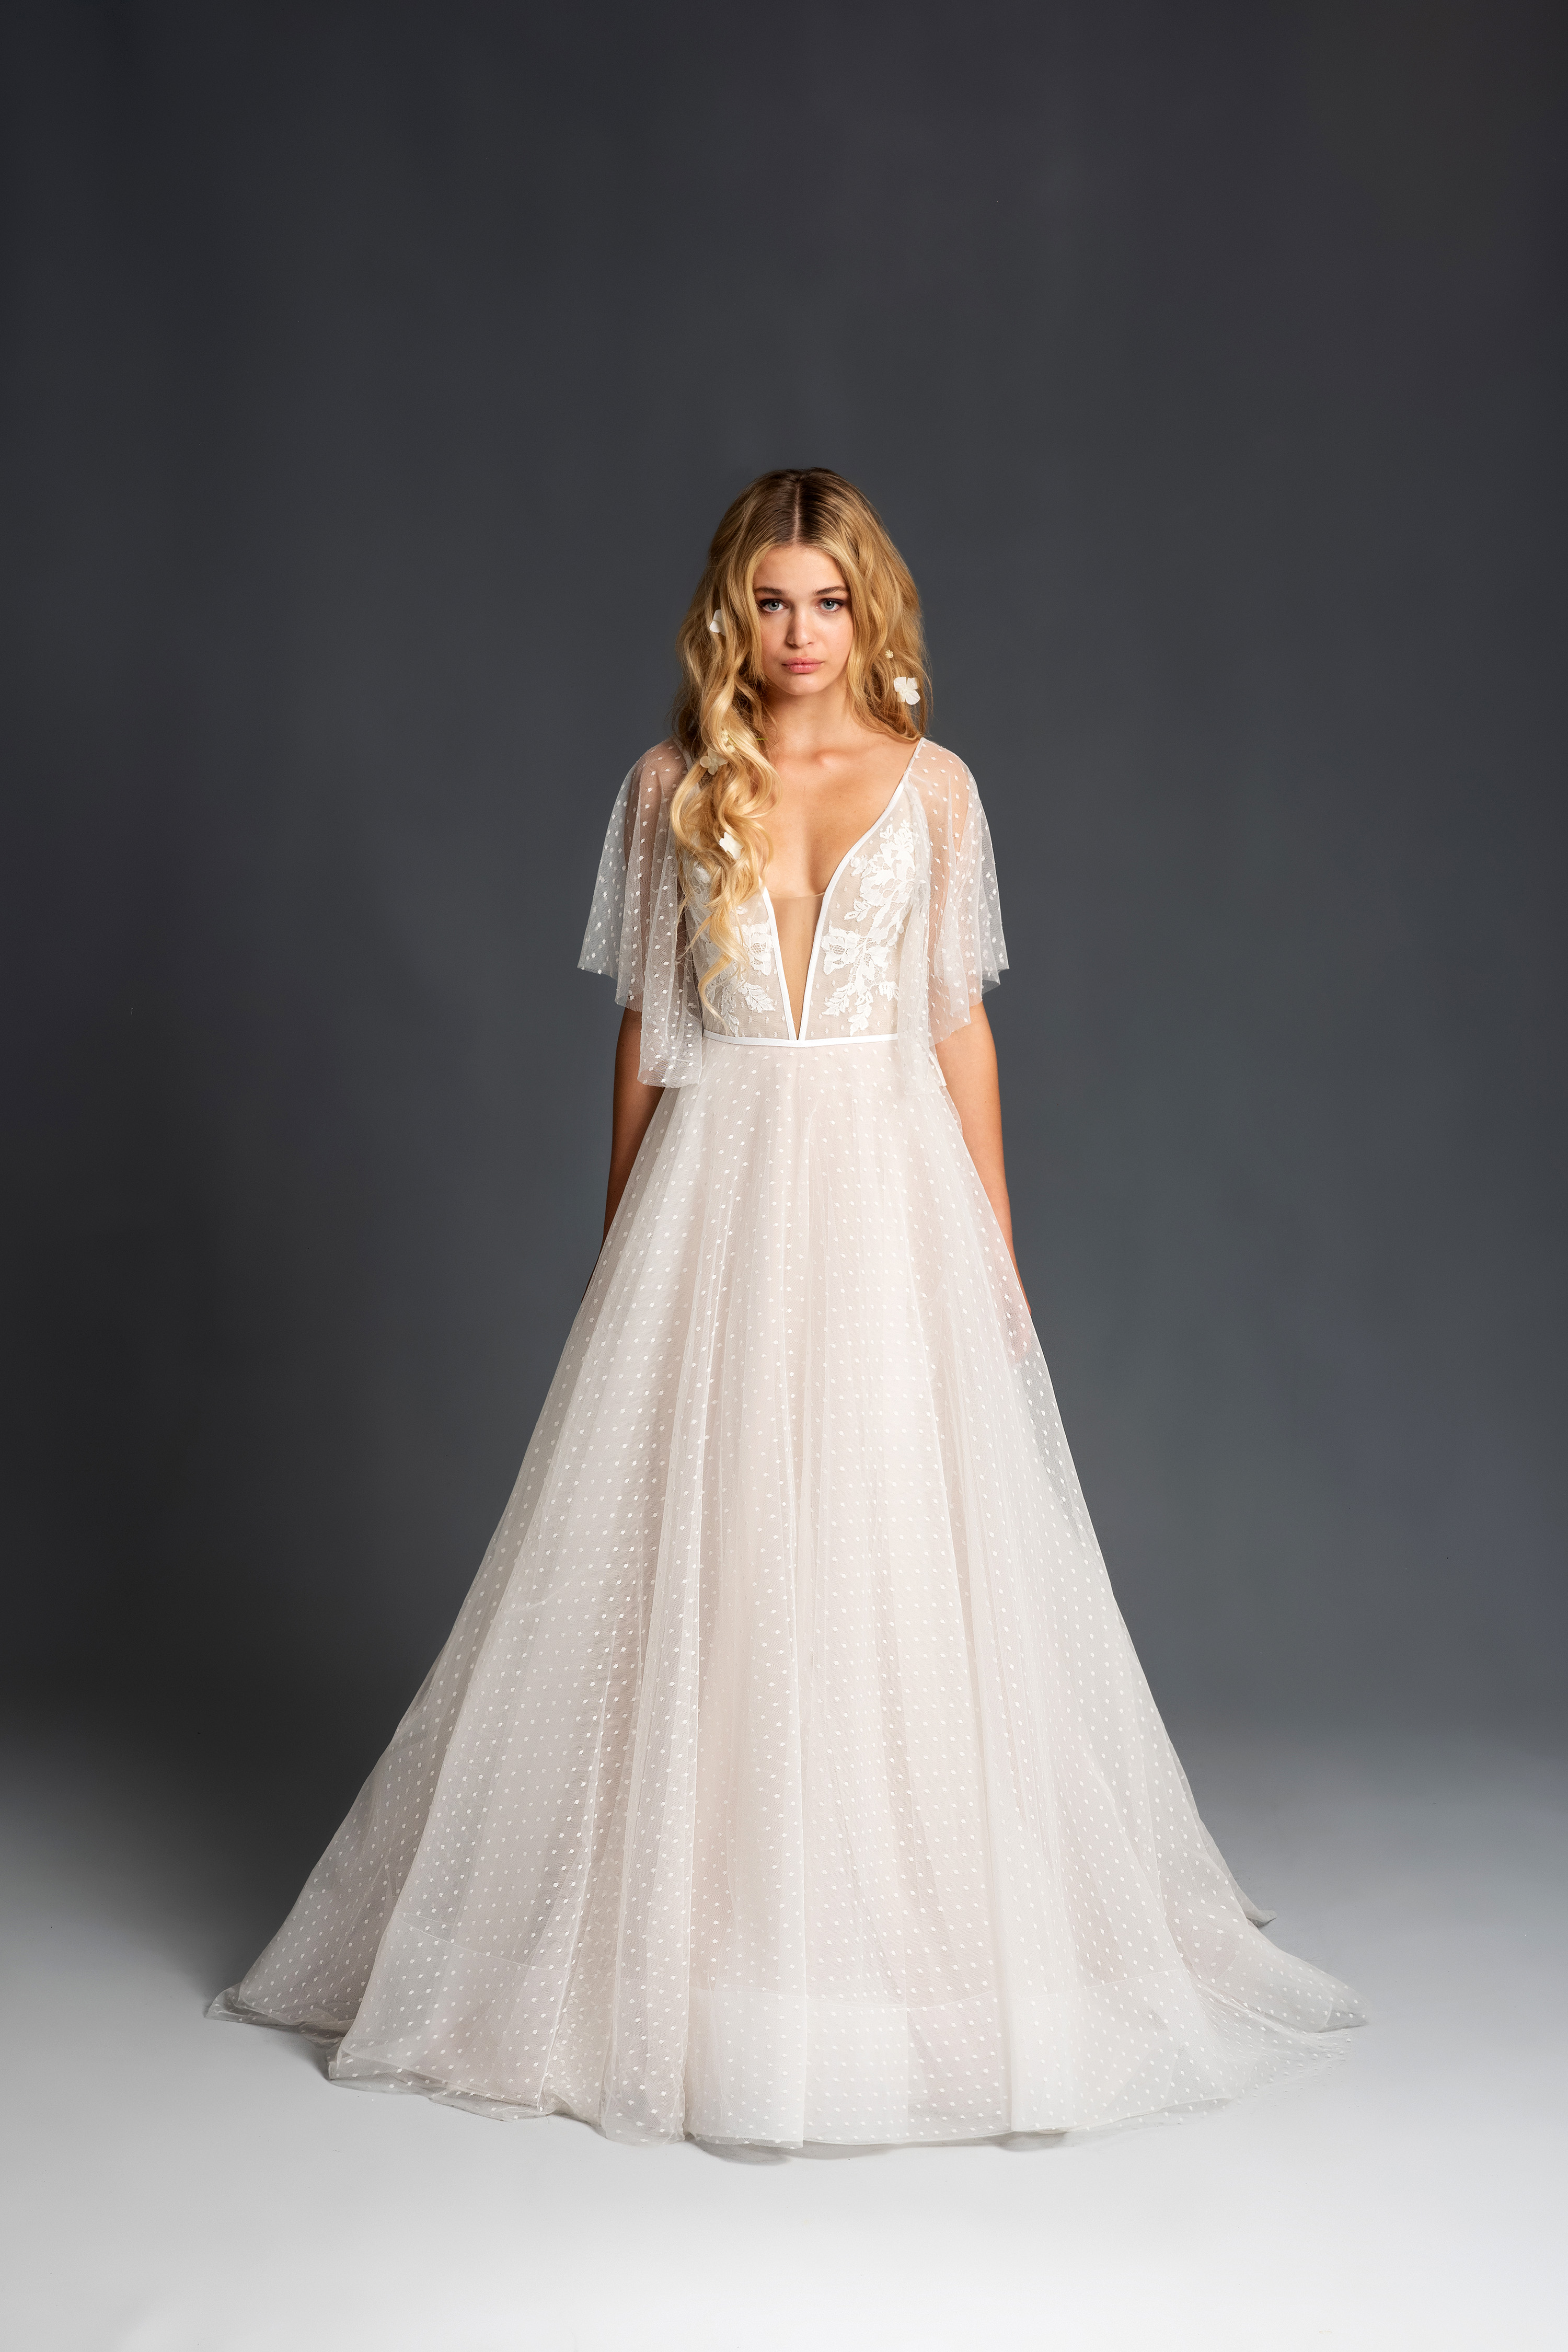  Blush  by Hayley Paige Spring 2020  Wedding  Dress  Collection 